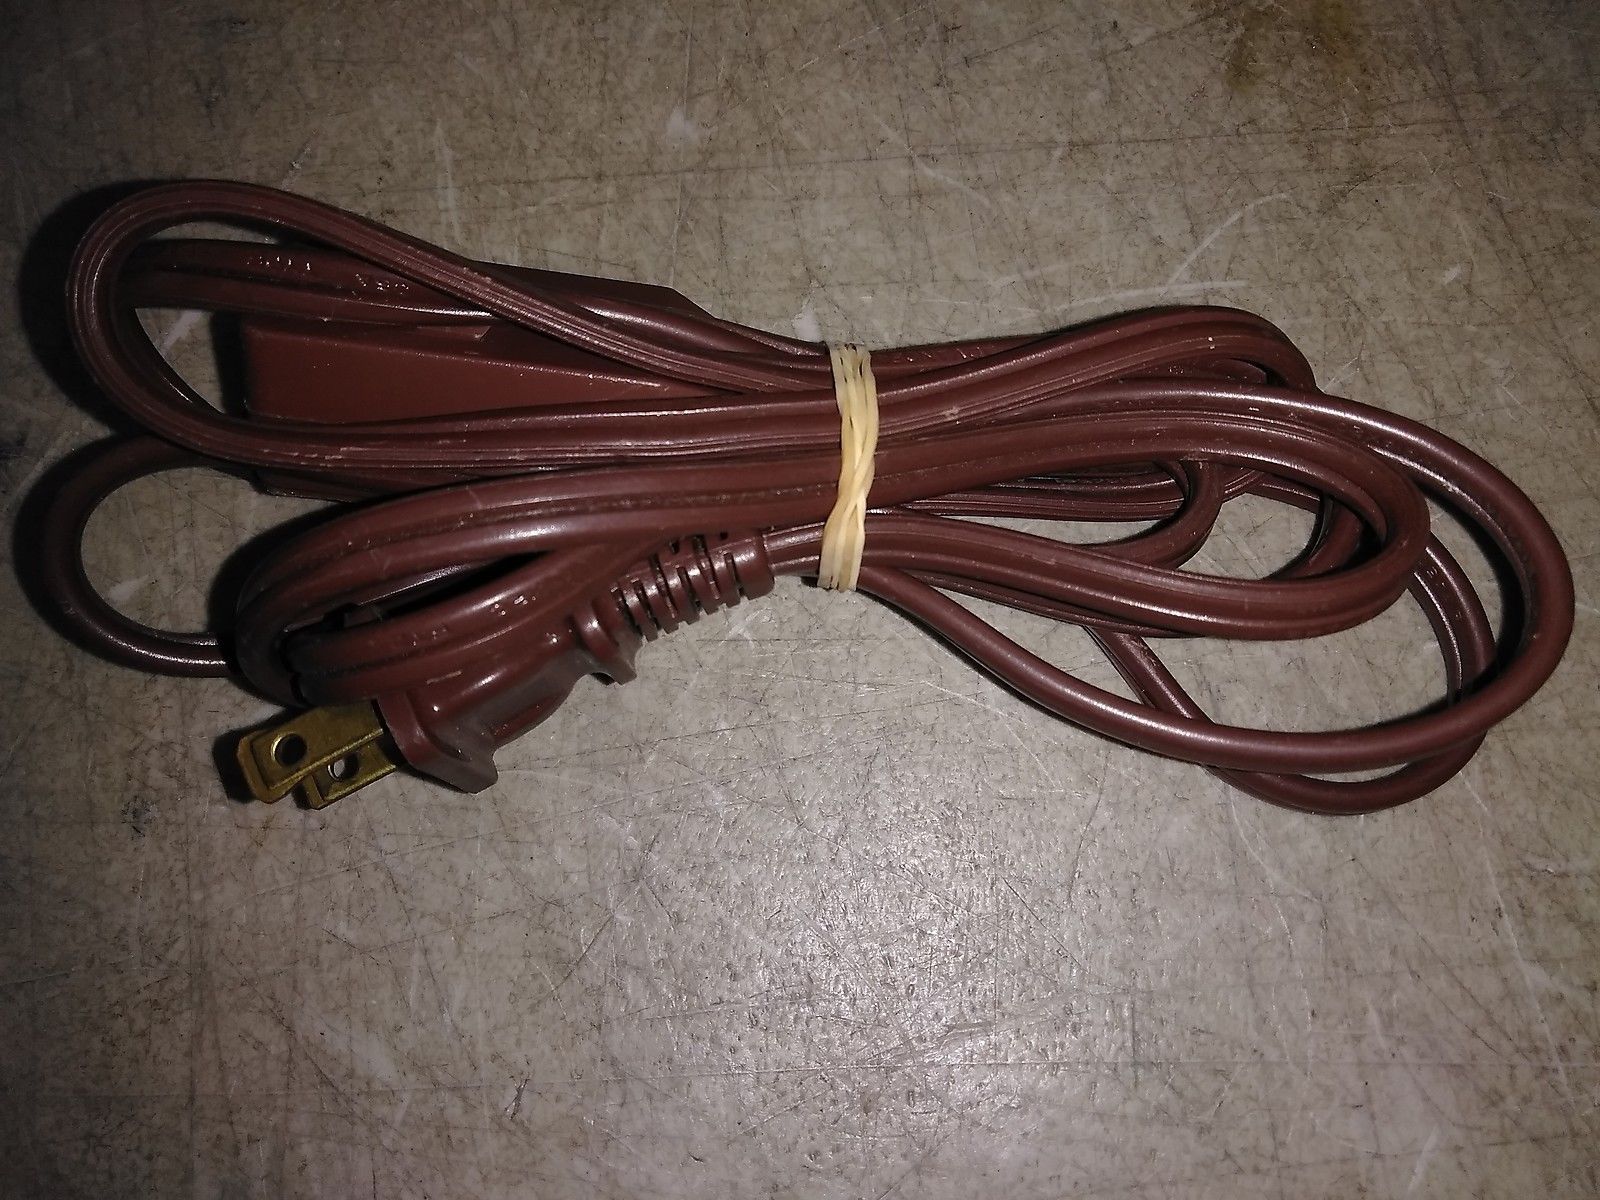 Primary image for 8GG10 EXTENSION CORD, BROWN, 16/2, TRIPLE TAP, VERY GOOD CONDITION